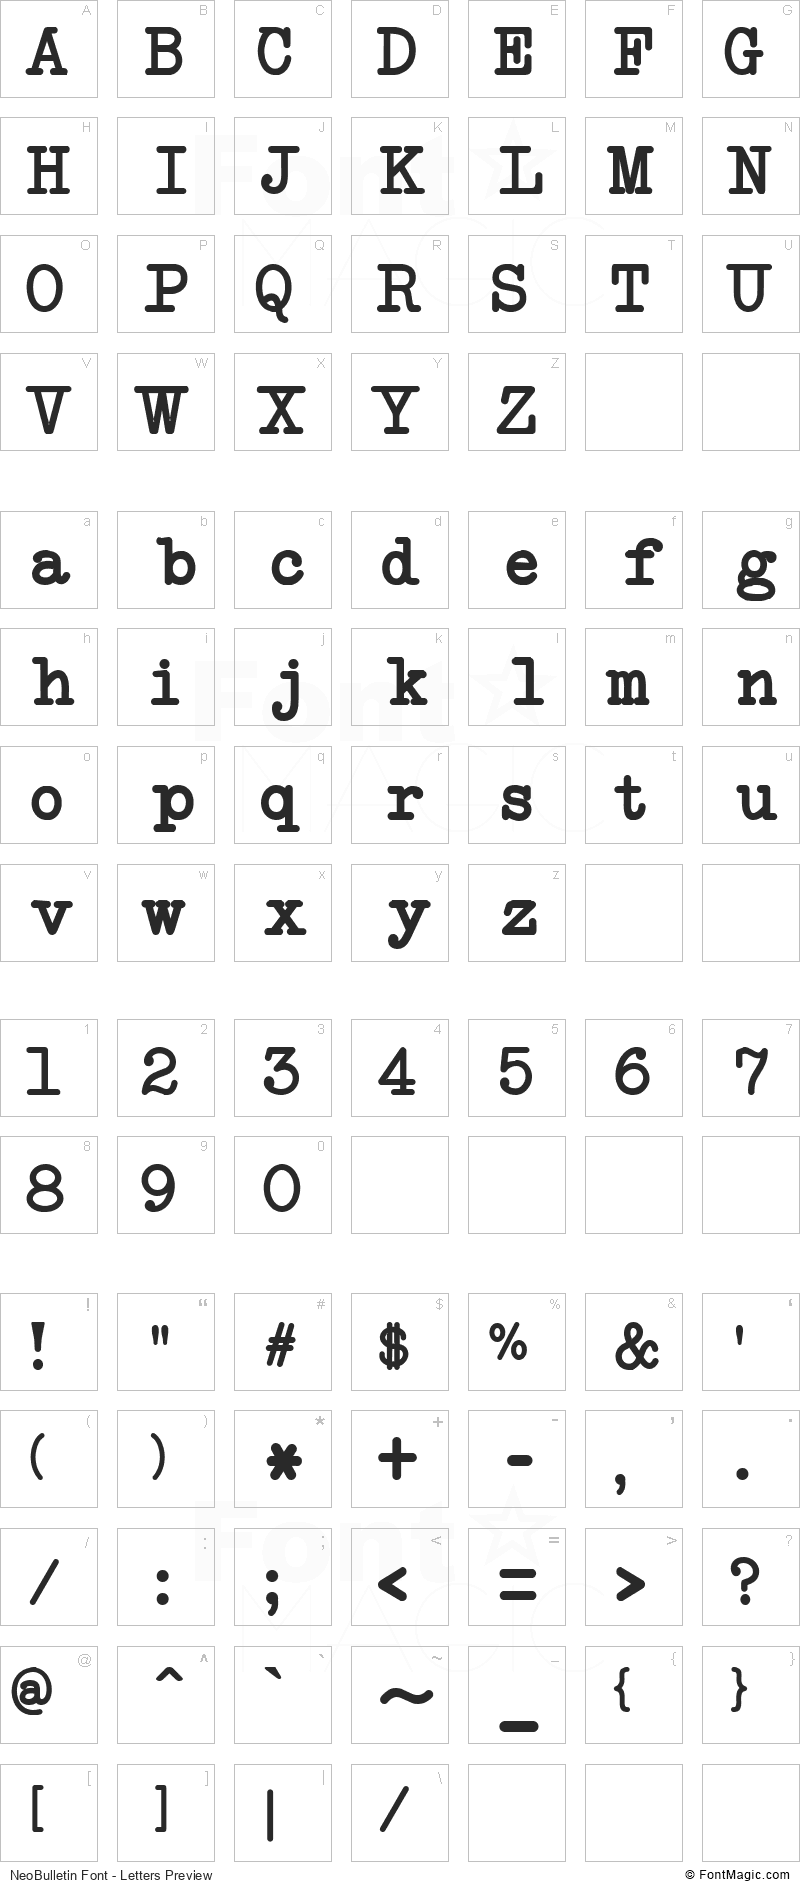 NeoBulletin Font - All Latters Preview Chart